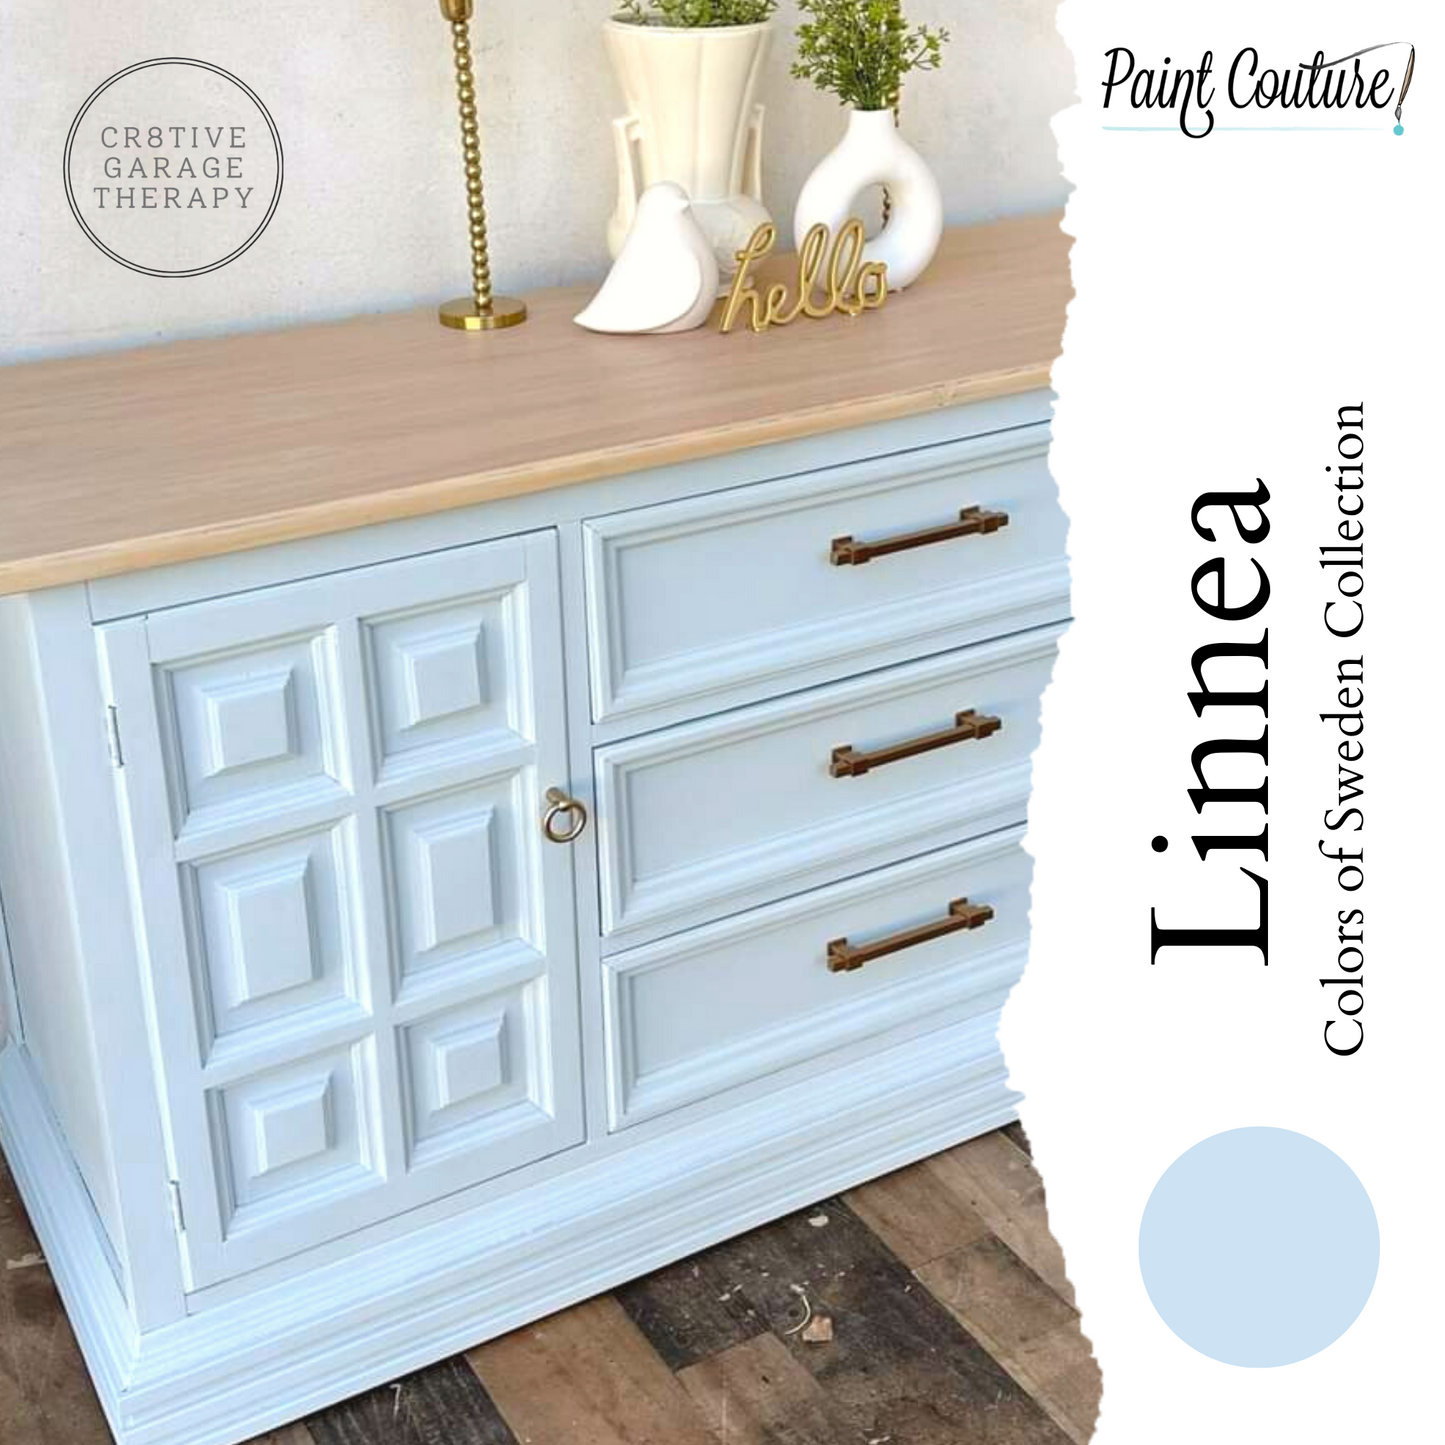 Paint Couture Linnea - Acrylic Mineral Paint with a Flat Finish!